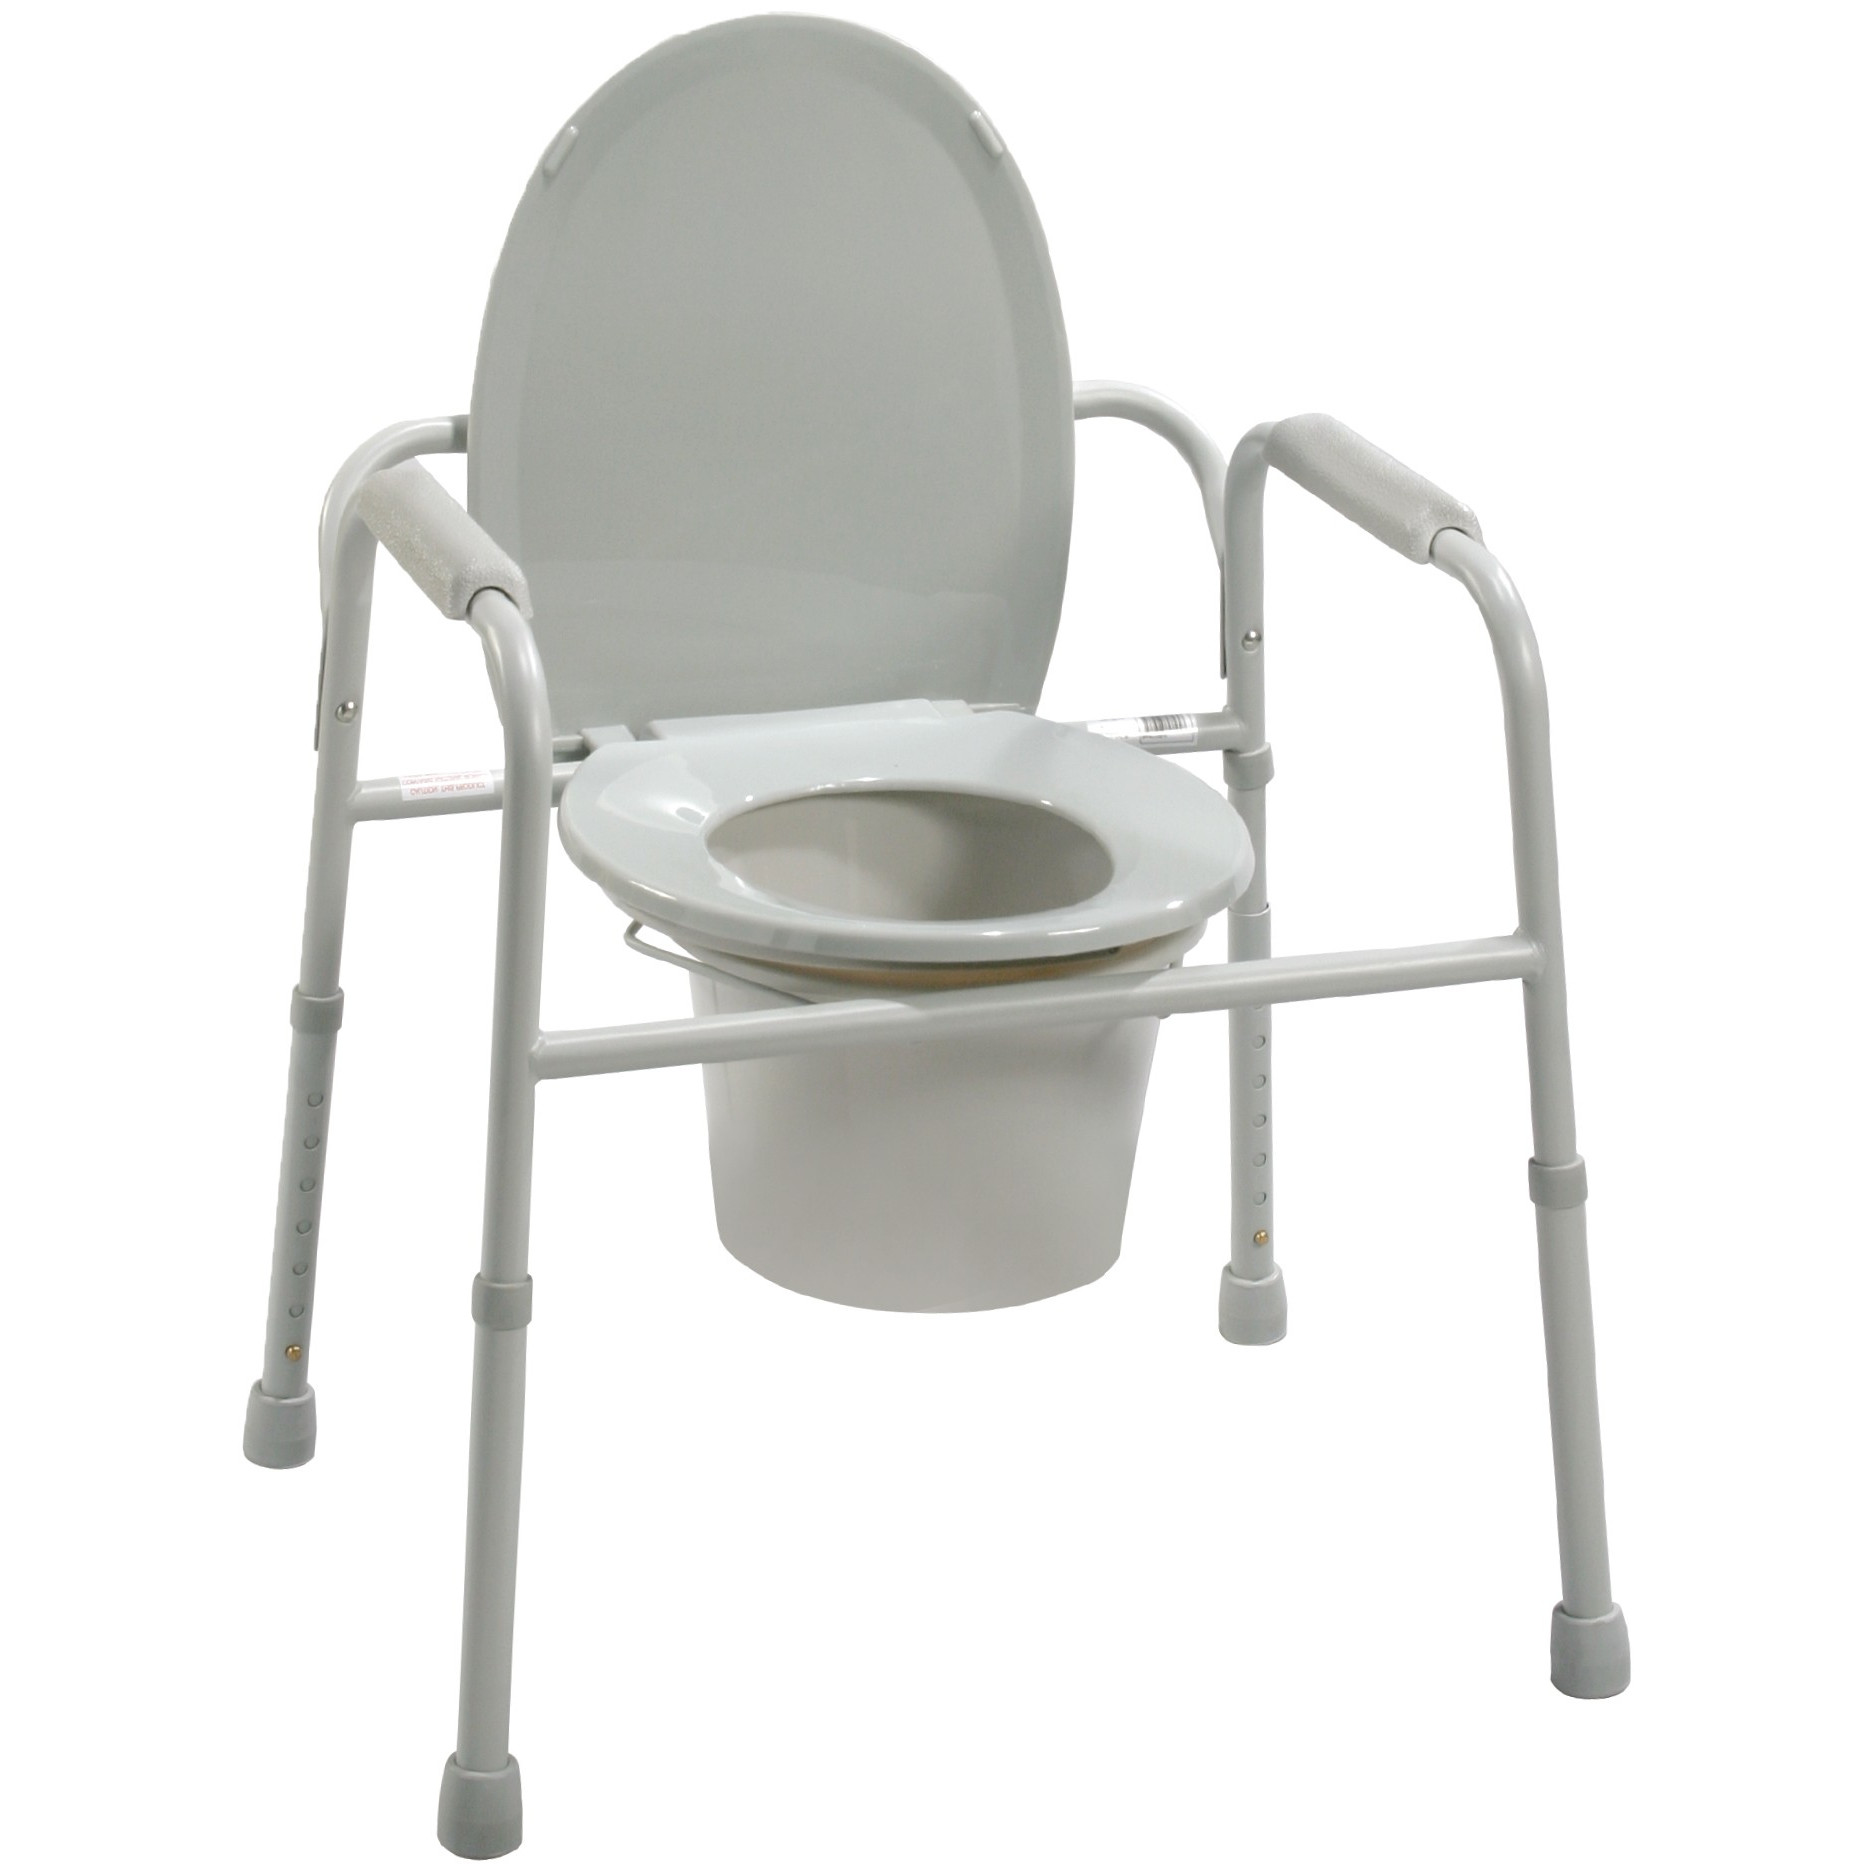 Deluxe All-In-One Welded Steel Commode With Plastic Armrests